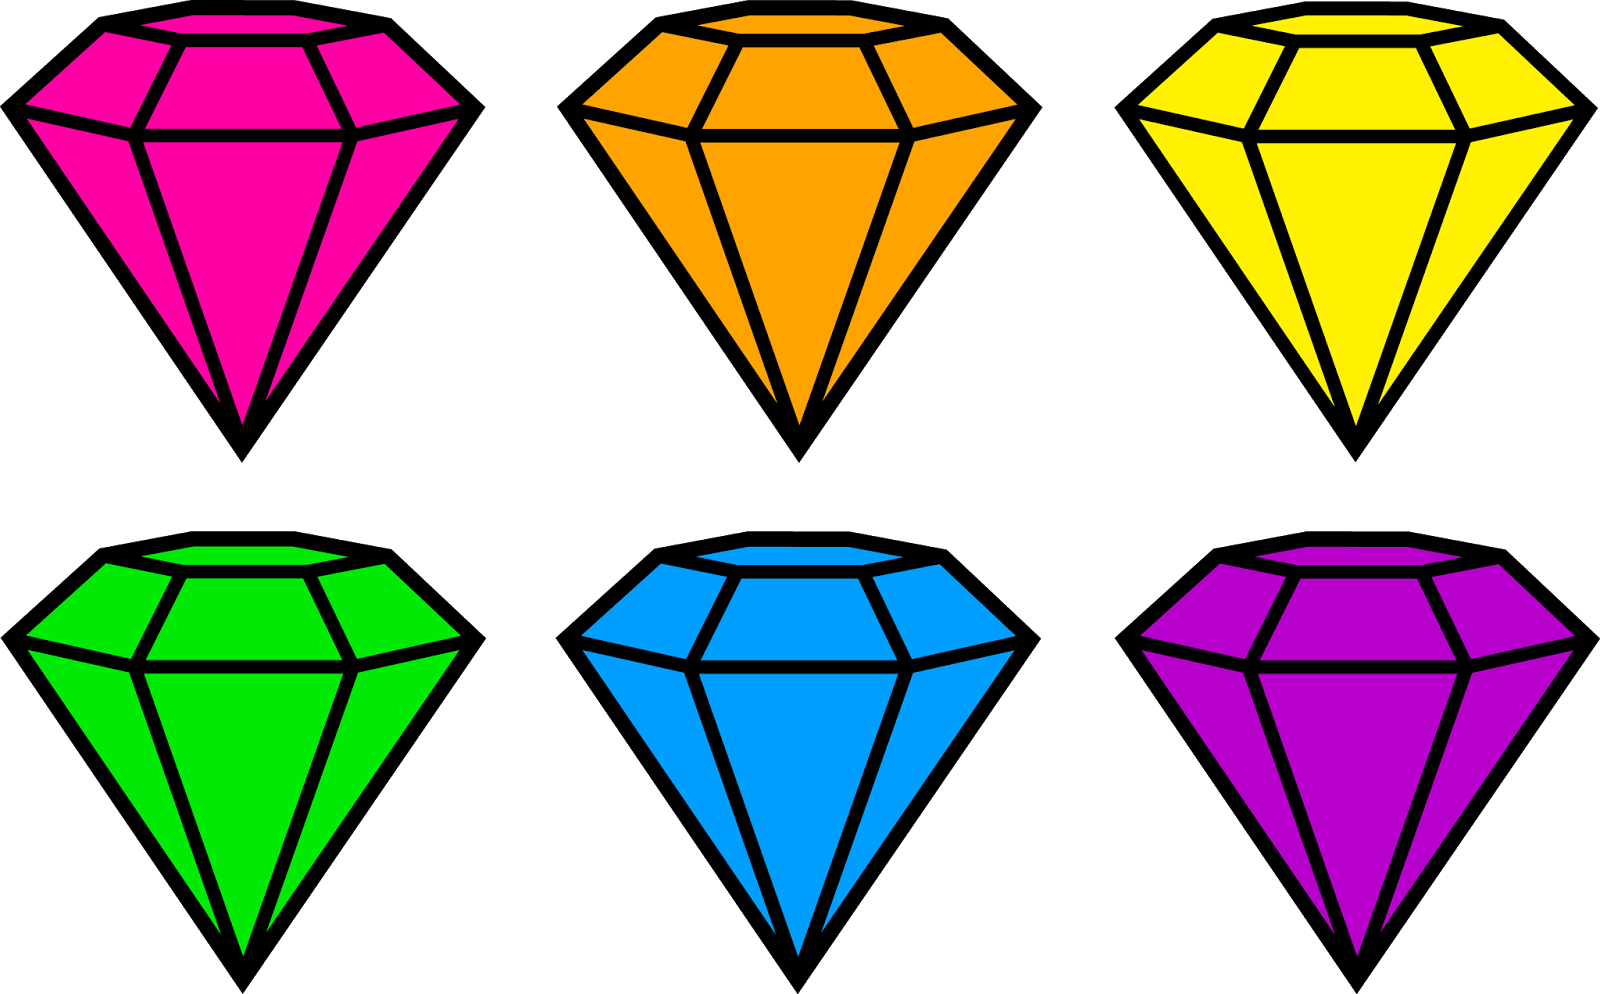 Sparkle clipart diamond shaped object. Collection of free appendixes